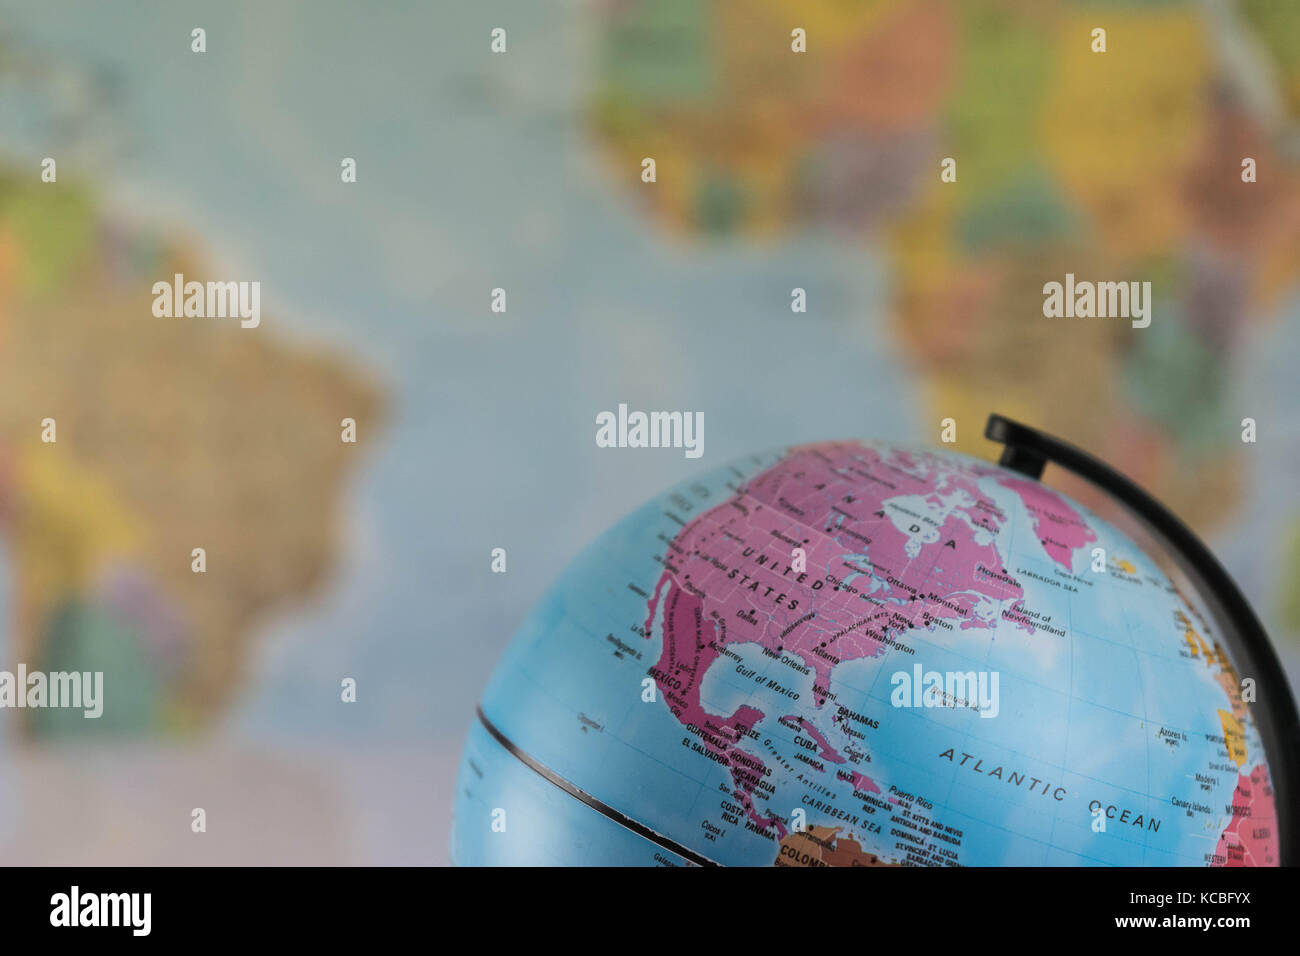 The United States of America on the map globe with blurred map as background Stock Photo